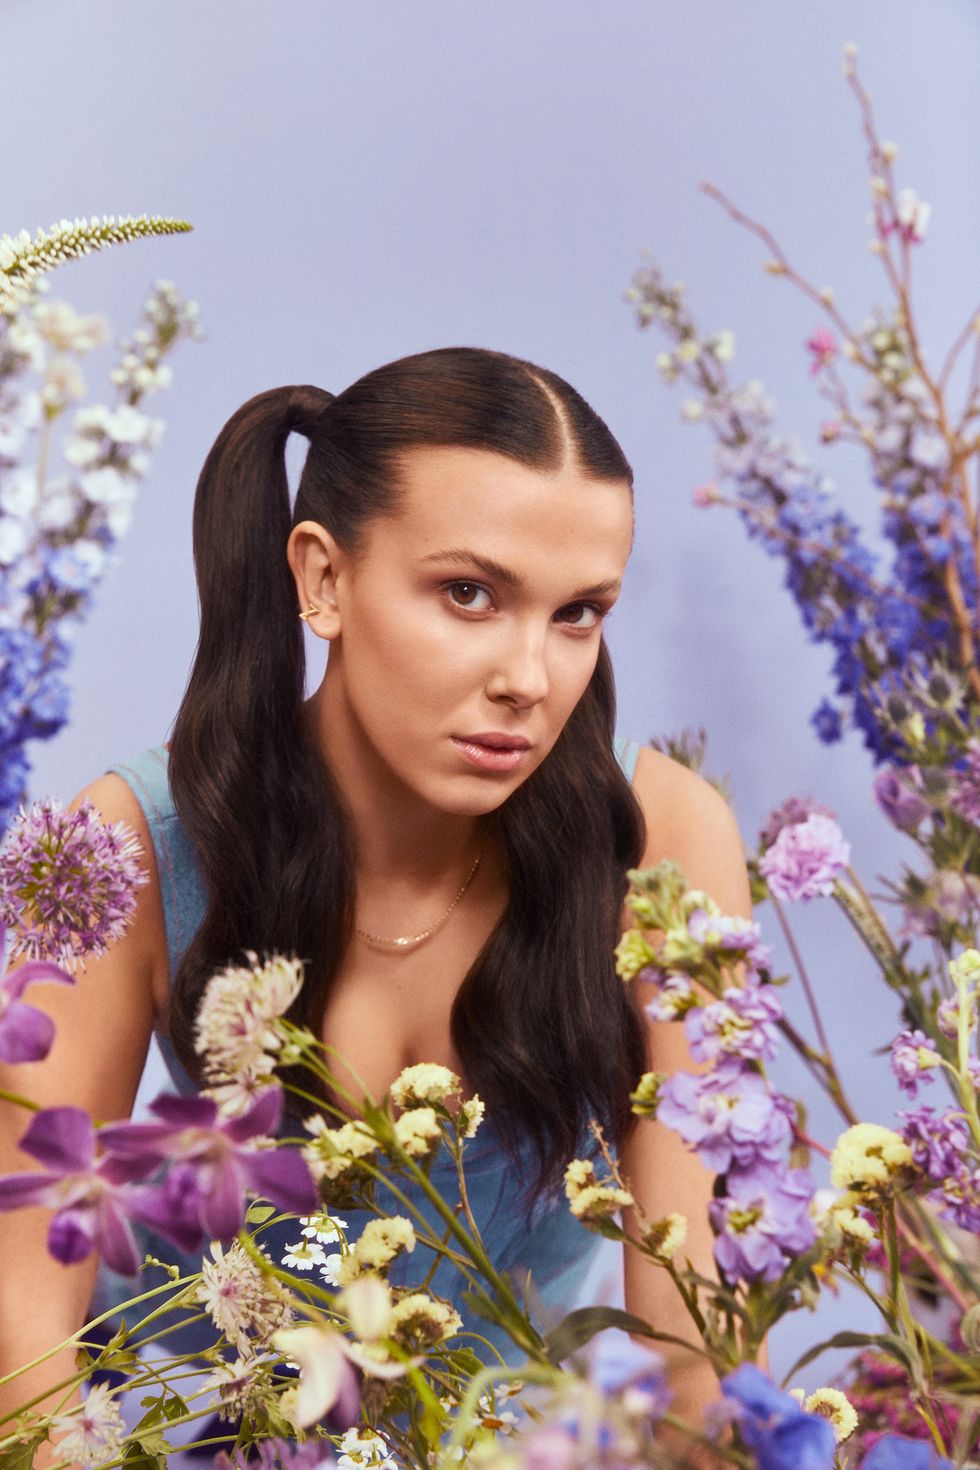 Millie Bobby Brown beauty interview